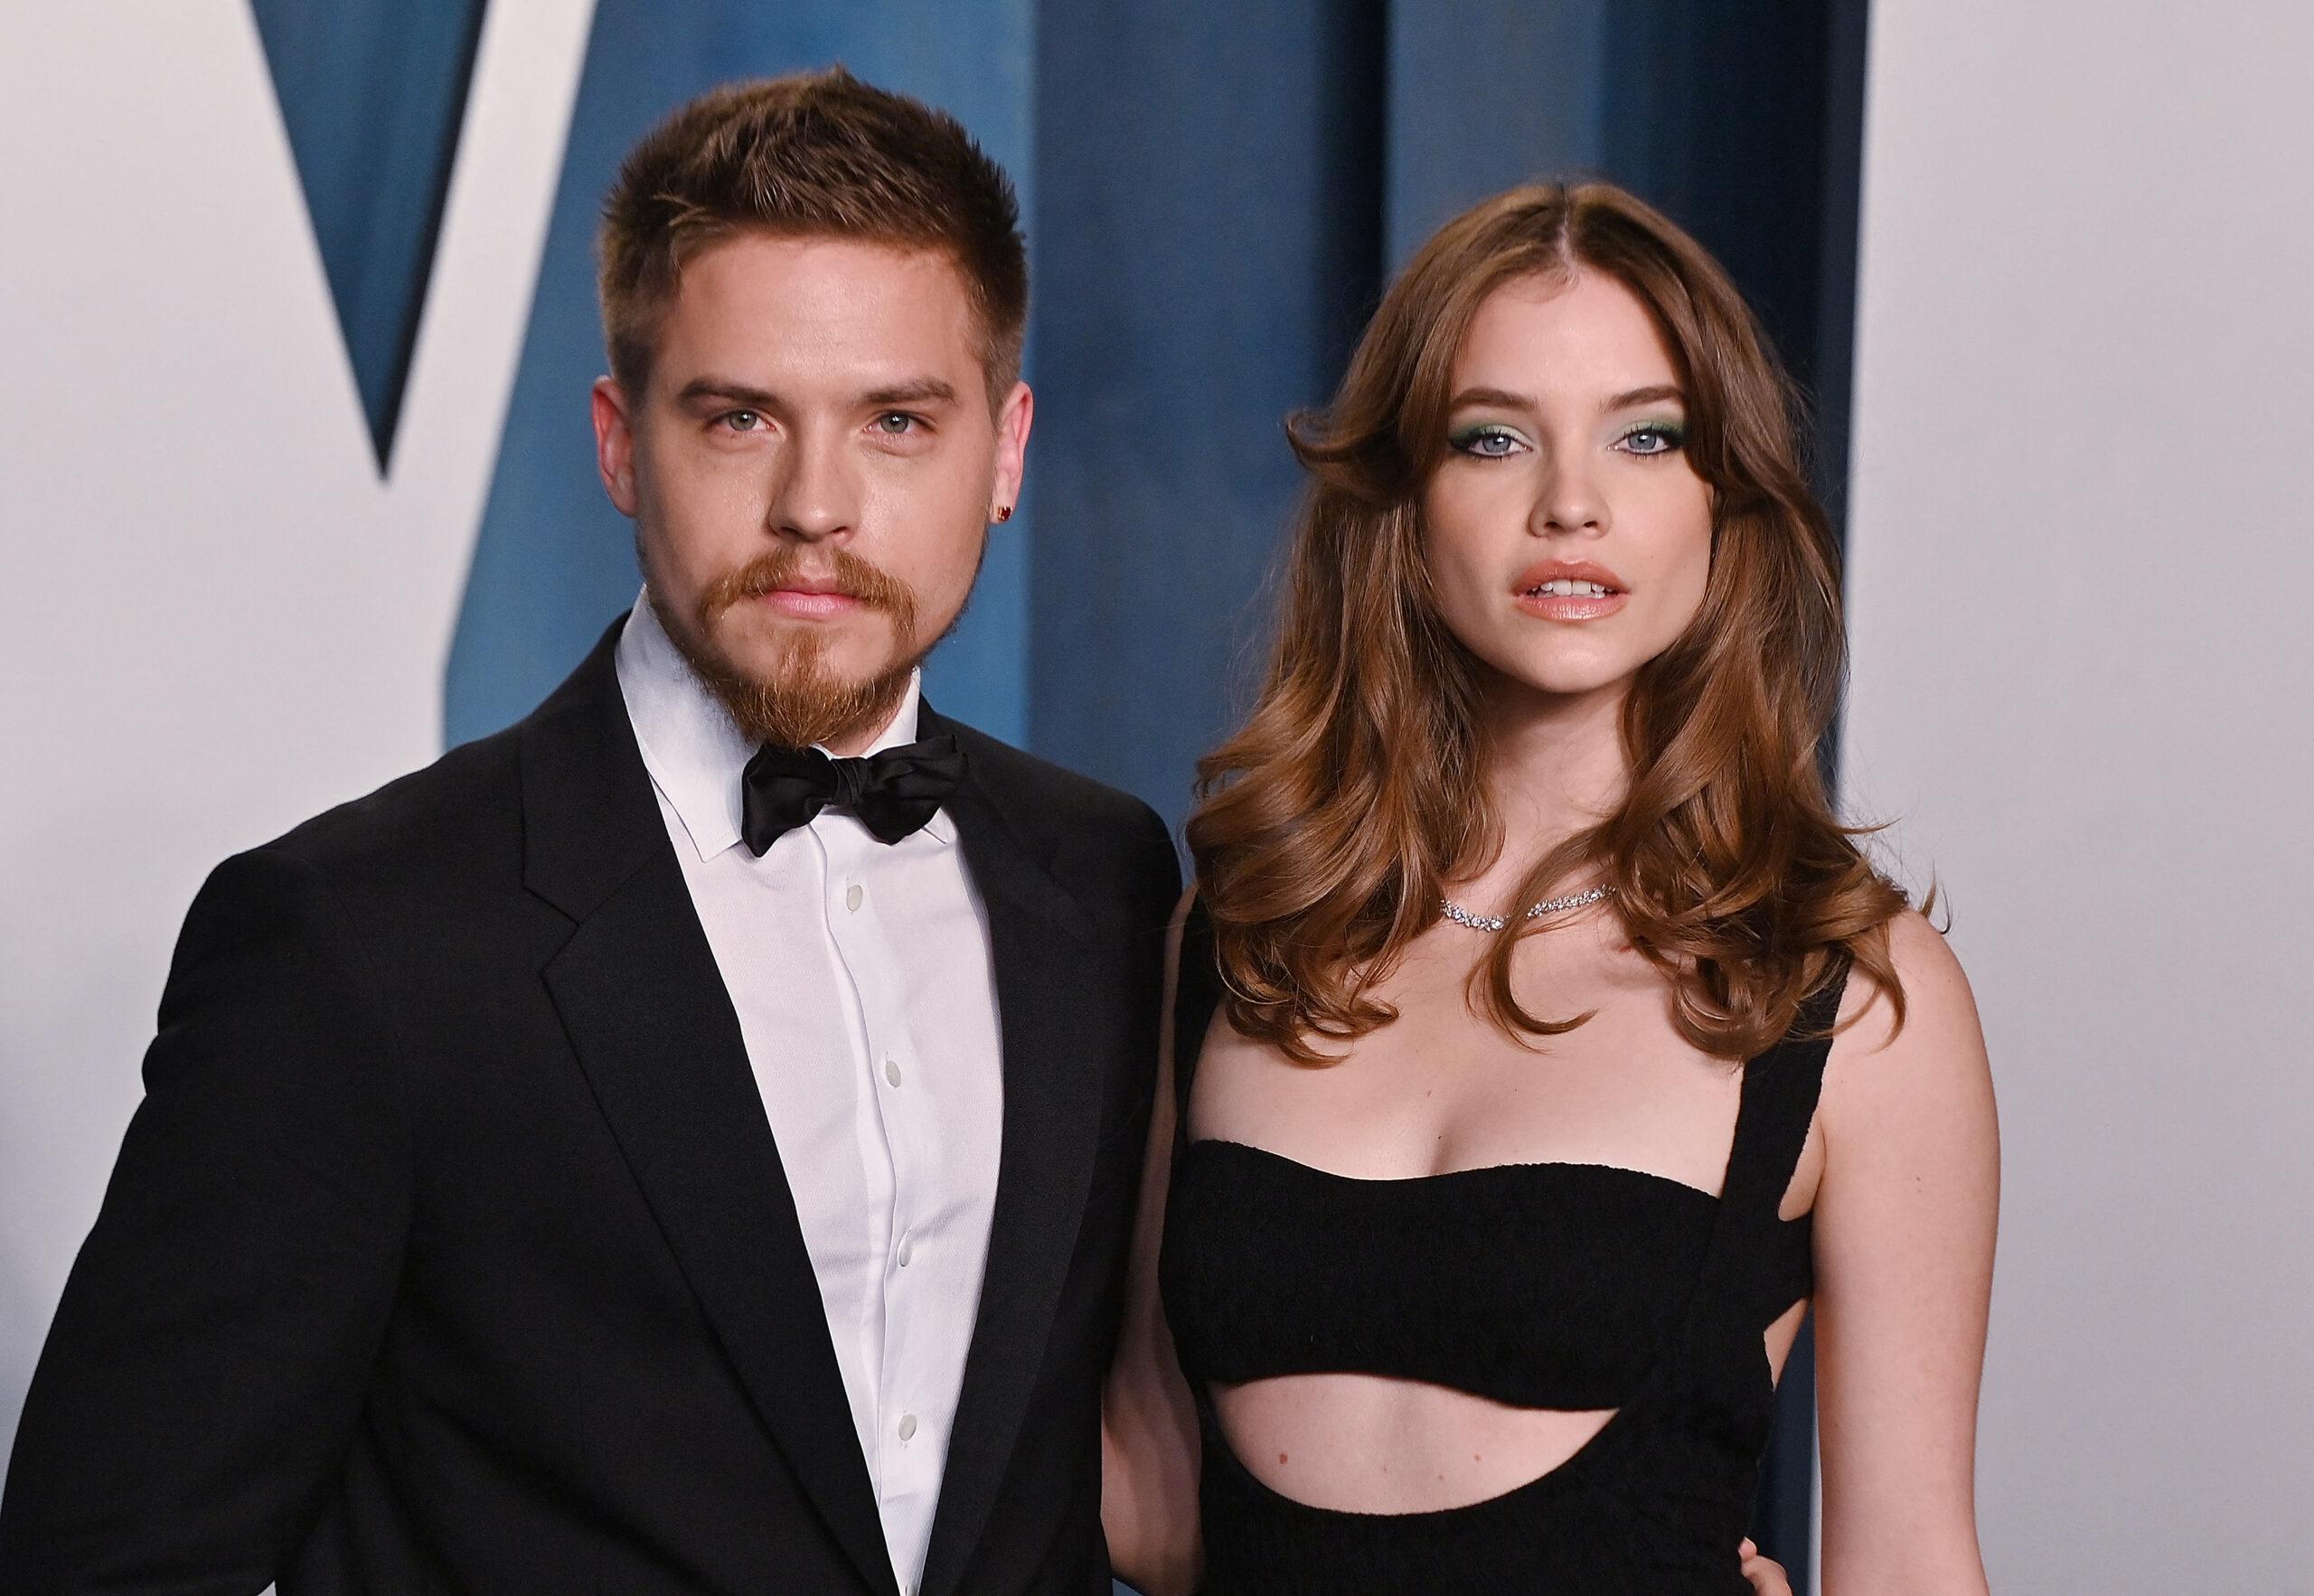 Dylan Sprouse And Barbara Palvin Have Reportedly Tied The Knot In A Beautiful Ceremony In Hungary